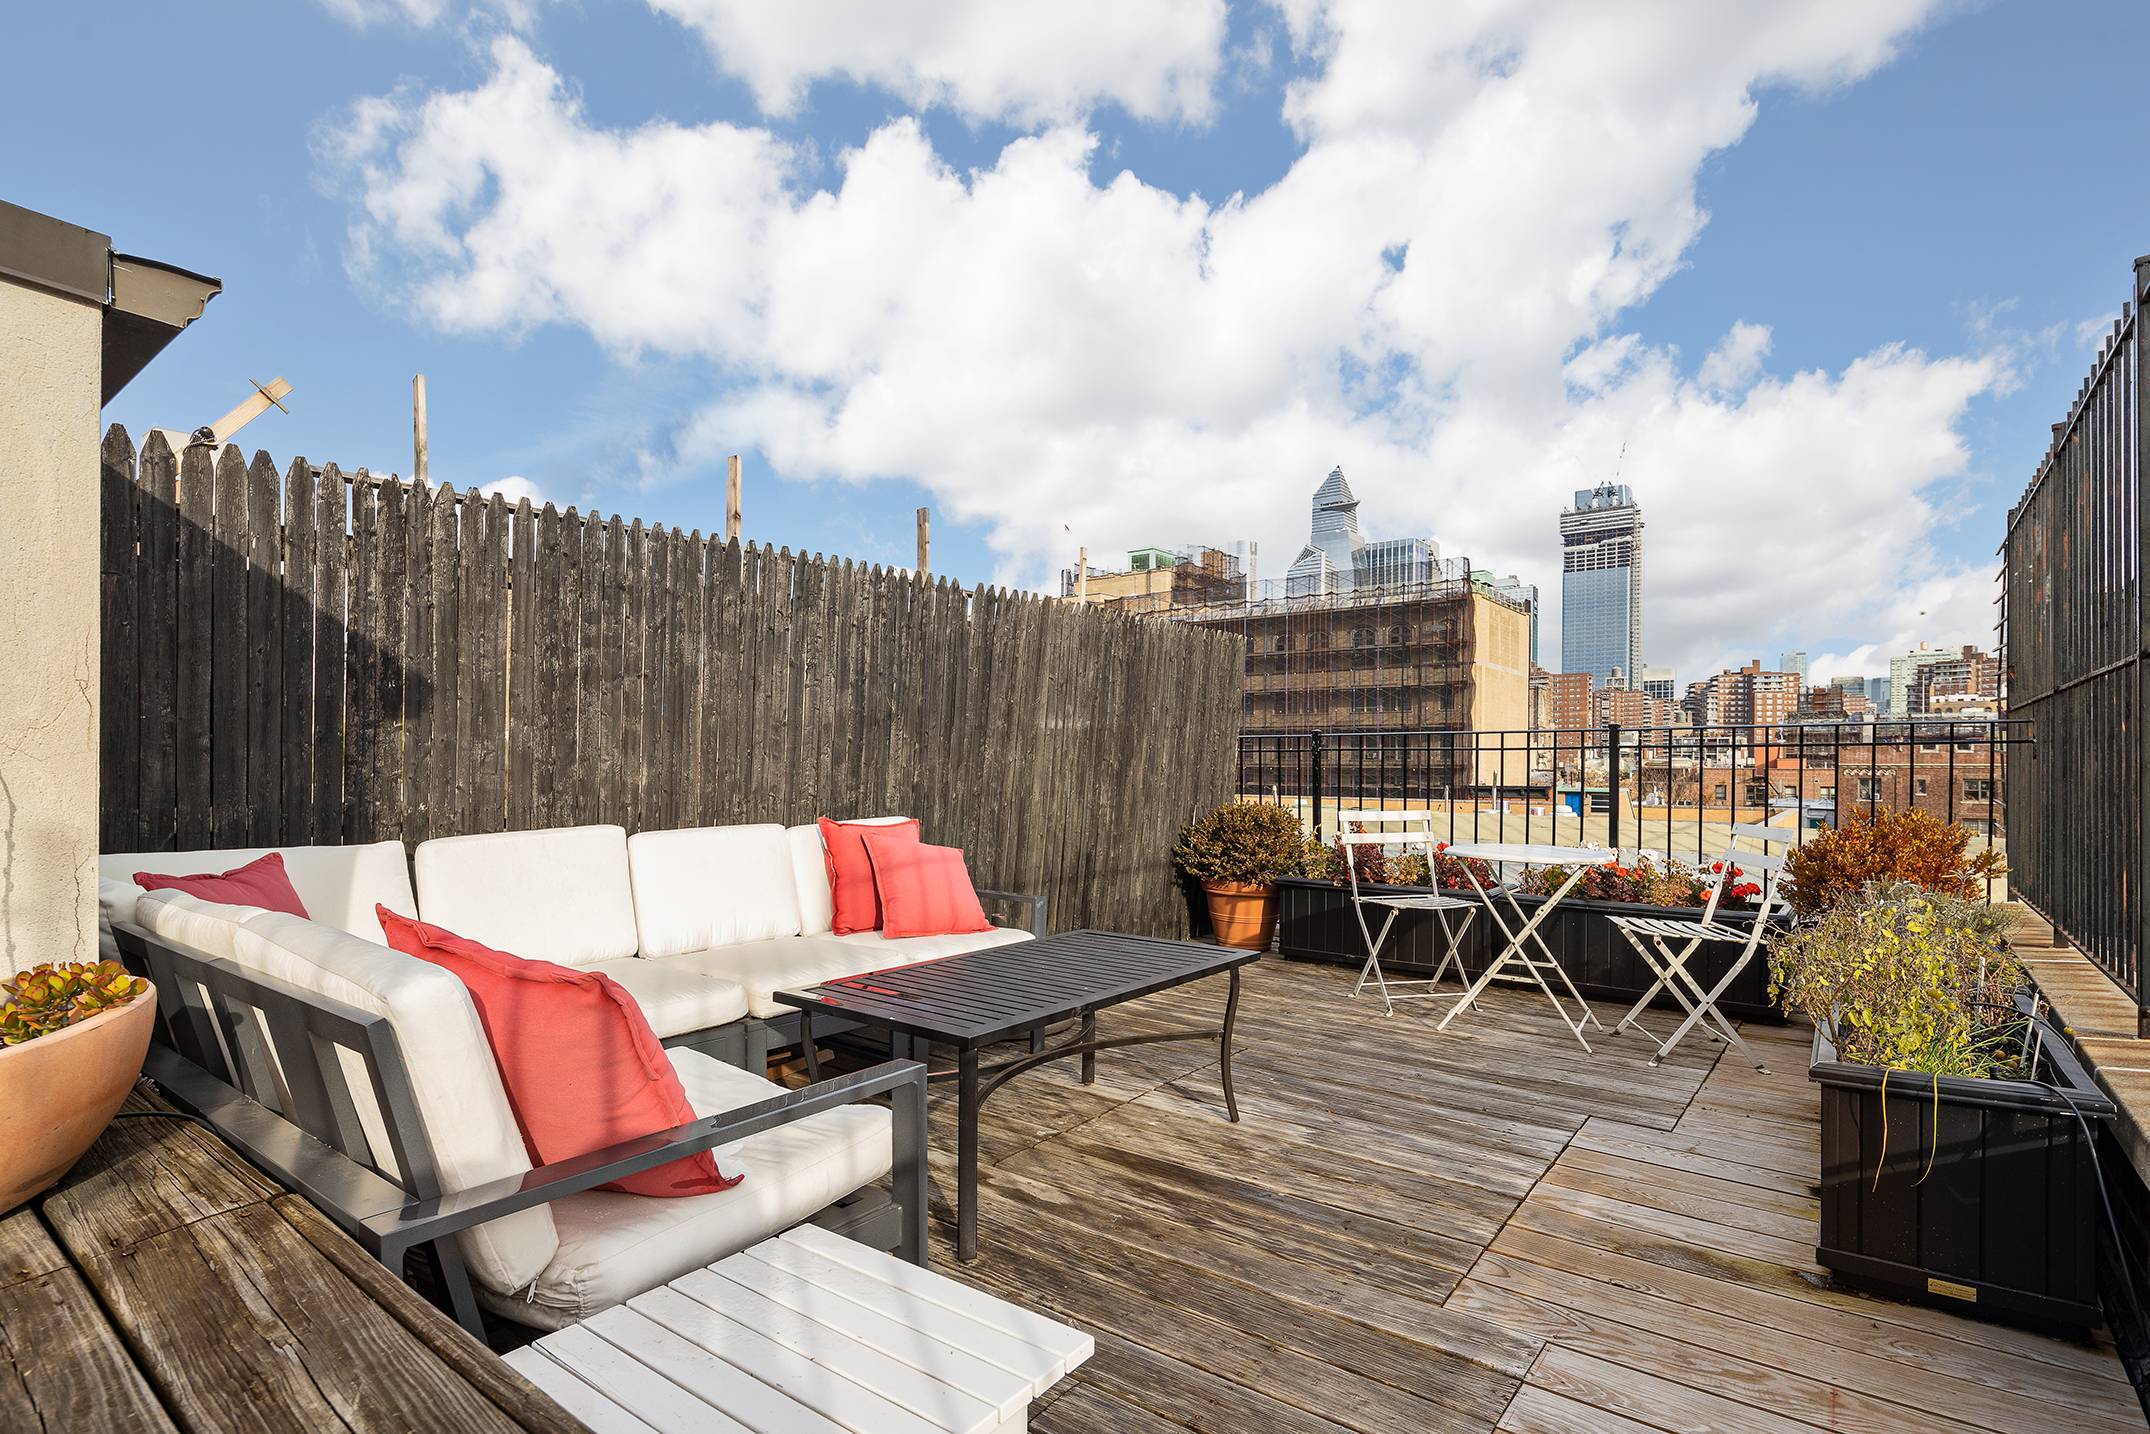 DREAM DUPLEX. The gorgeous private roof deck with beautiful views on the upper floor is the icing on the cake of this two bedroom light filled duplex.